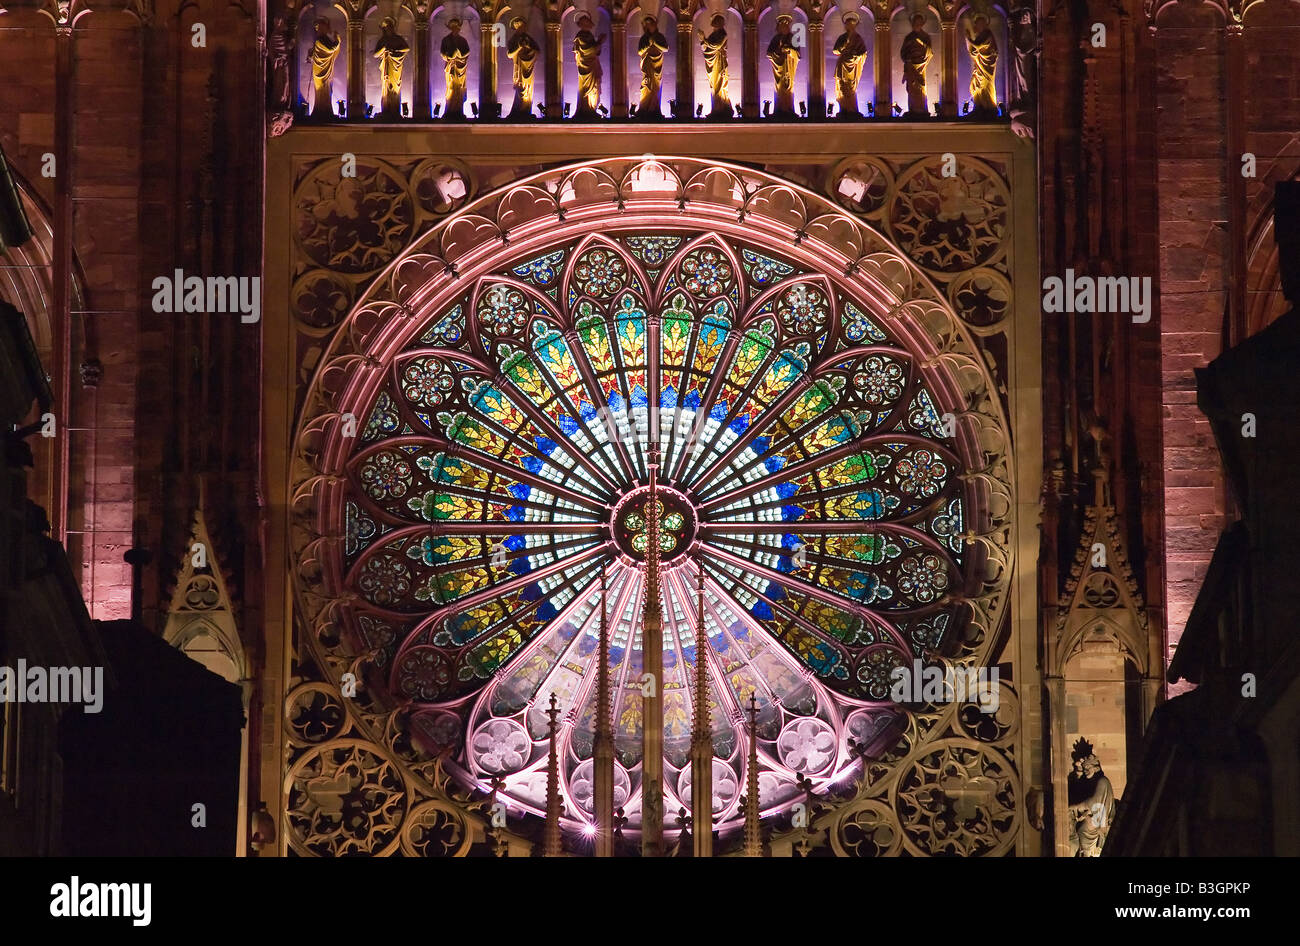 Illuminated rose window of Notre-Dame gothic cathedral 14th century at night, Strasbourg, Alsace, France, Europe Stock Photo